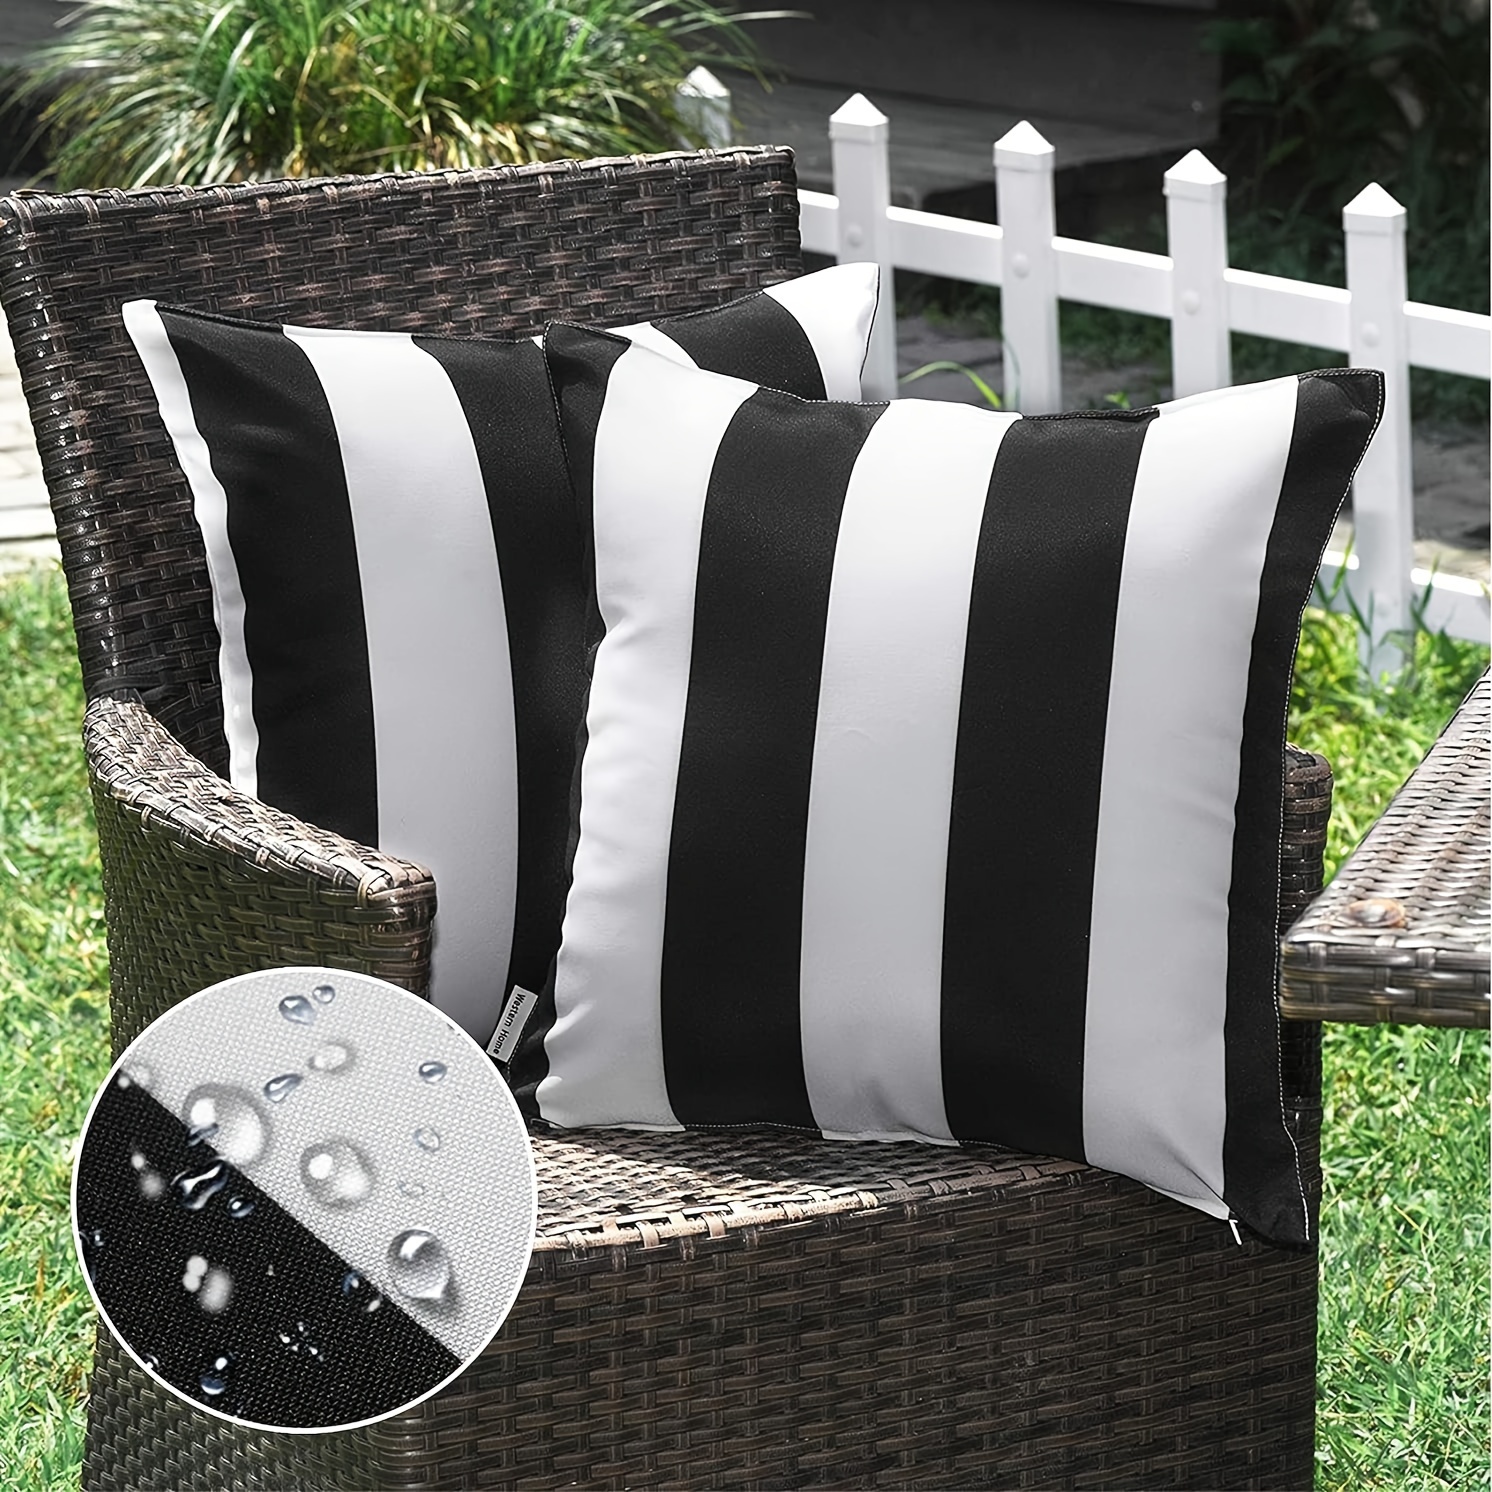 

2pcs Decorative Outdoor Oxford Cloth Waterproof Striped Throw Pillow Covers, Mordern Garden Farmhouse Cushion Cases For Patio Tent Balcony Couch Sofa (no Pillow Insert)